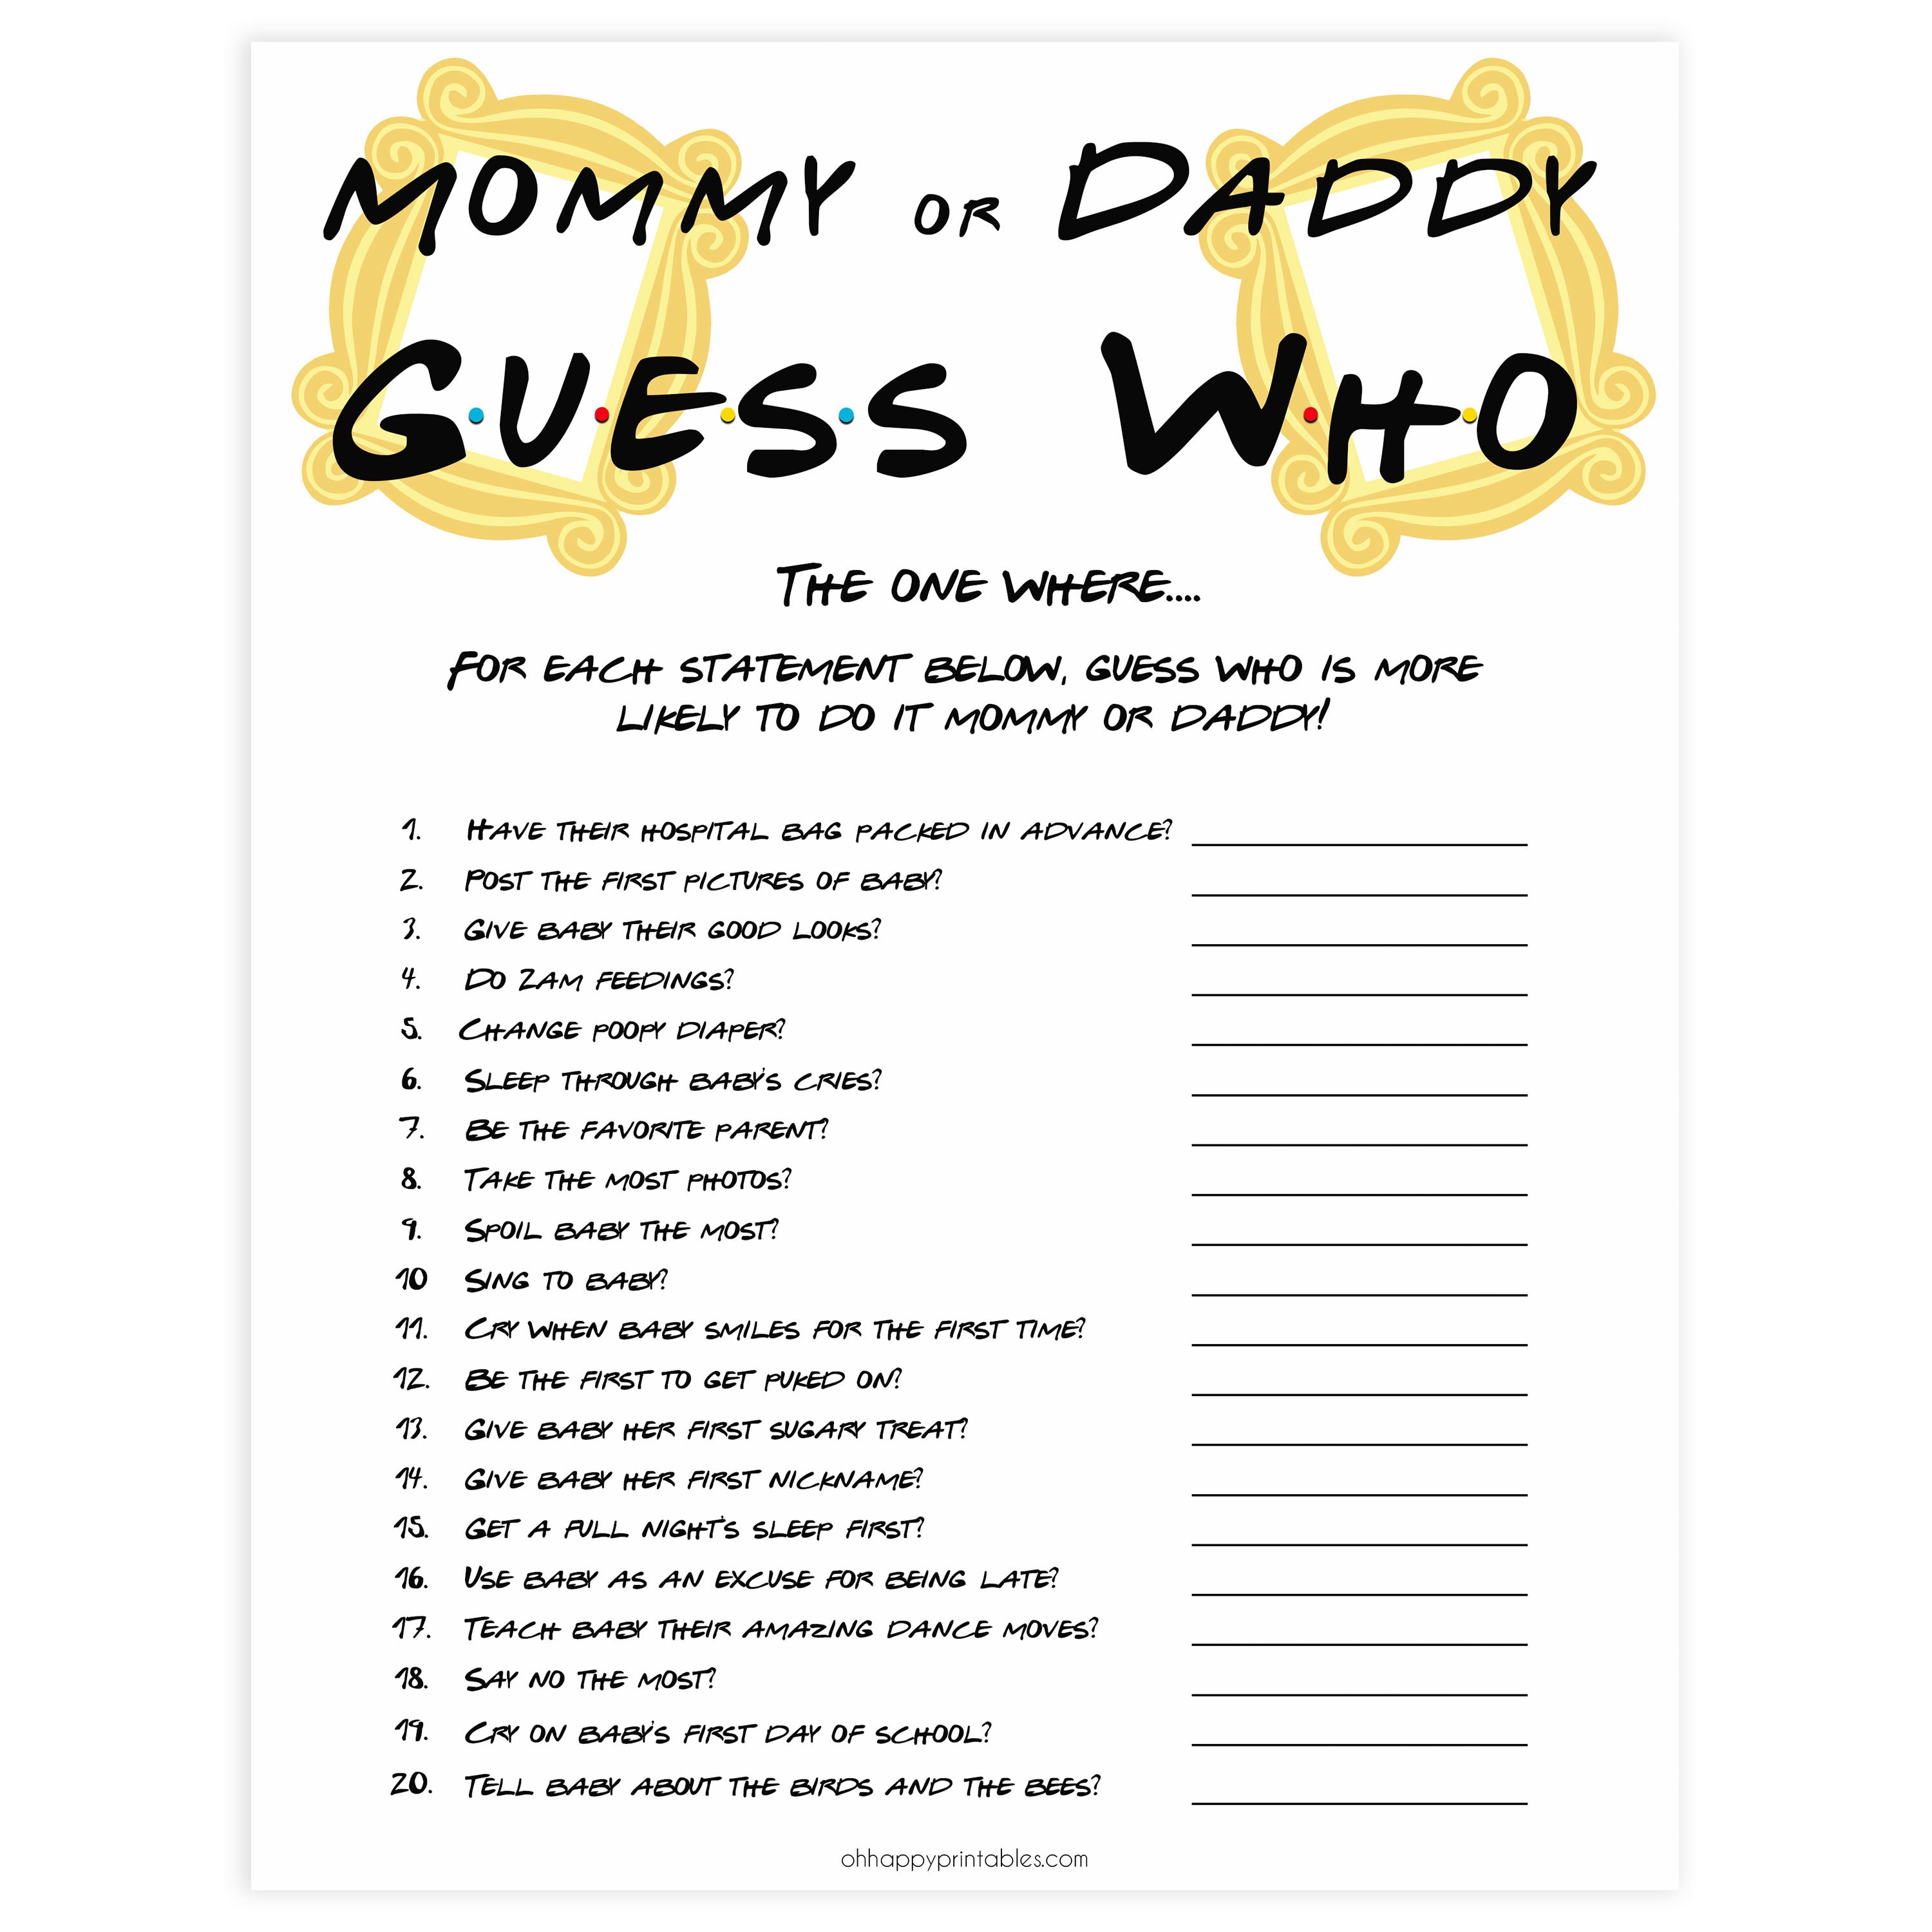 guess who baby game, Printable baby shower games, friends fun baby games, baby shower games, fun baby shower ideas, top baby shower ideas, friends baby shower, friends baby shower ideas